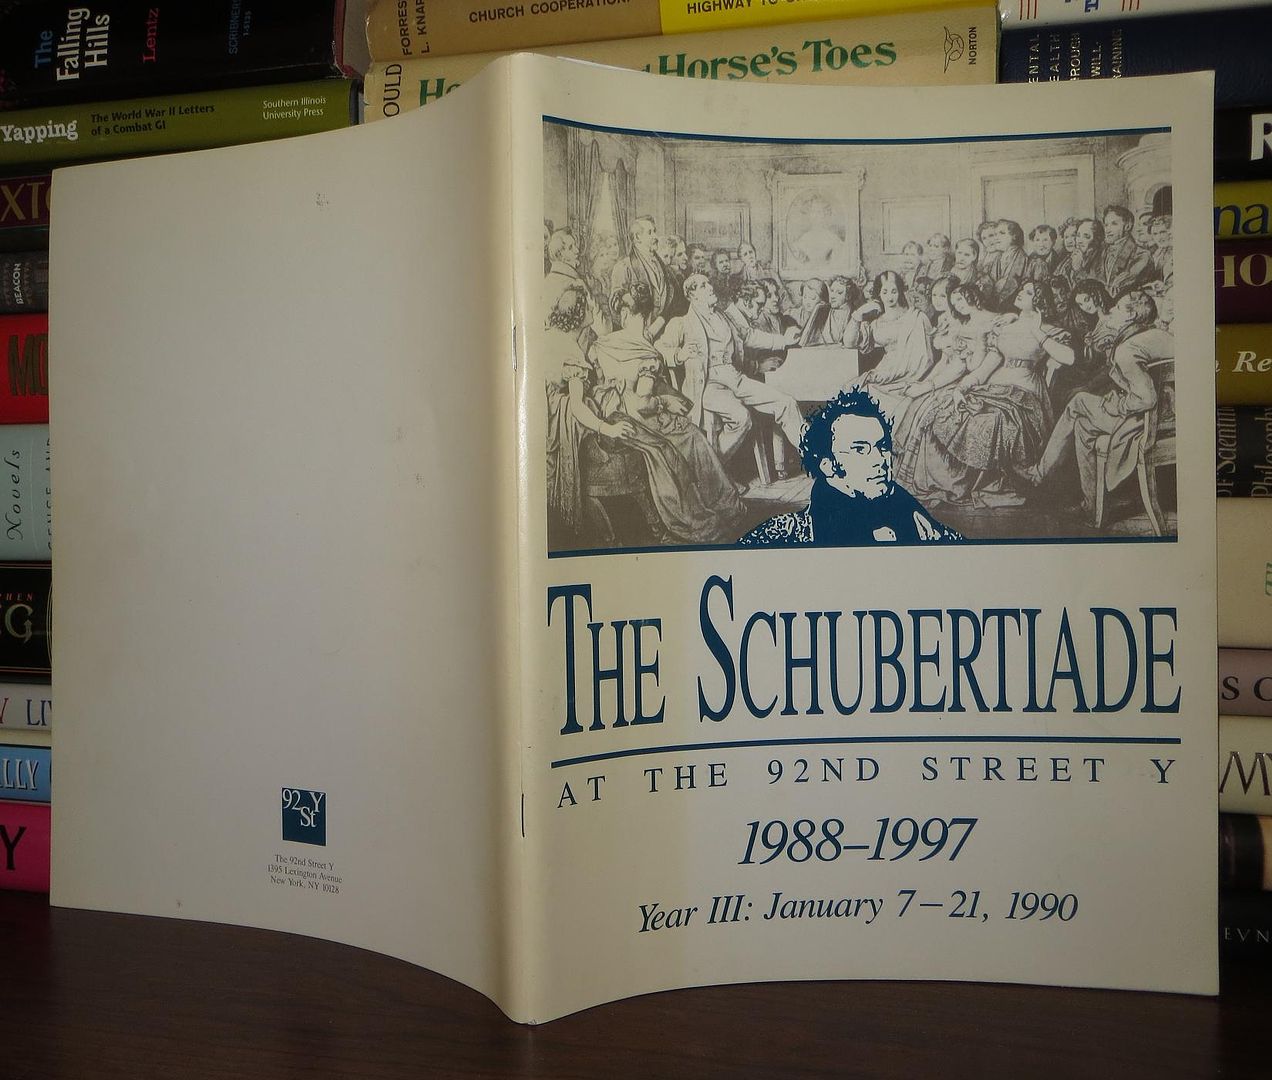 HIRSHBEIN, OMUS, ET AL - The Schubertiade at the 92nd Street y: Year III: January 7 - 21, 1990